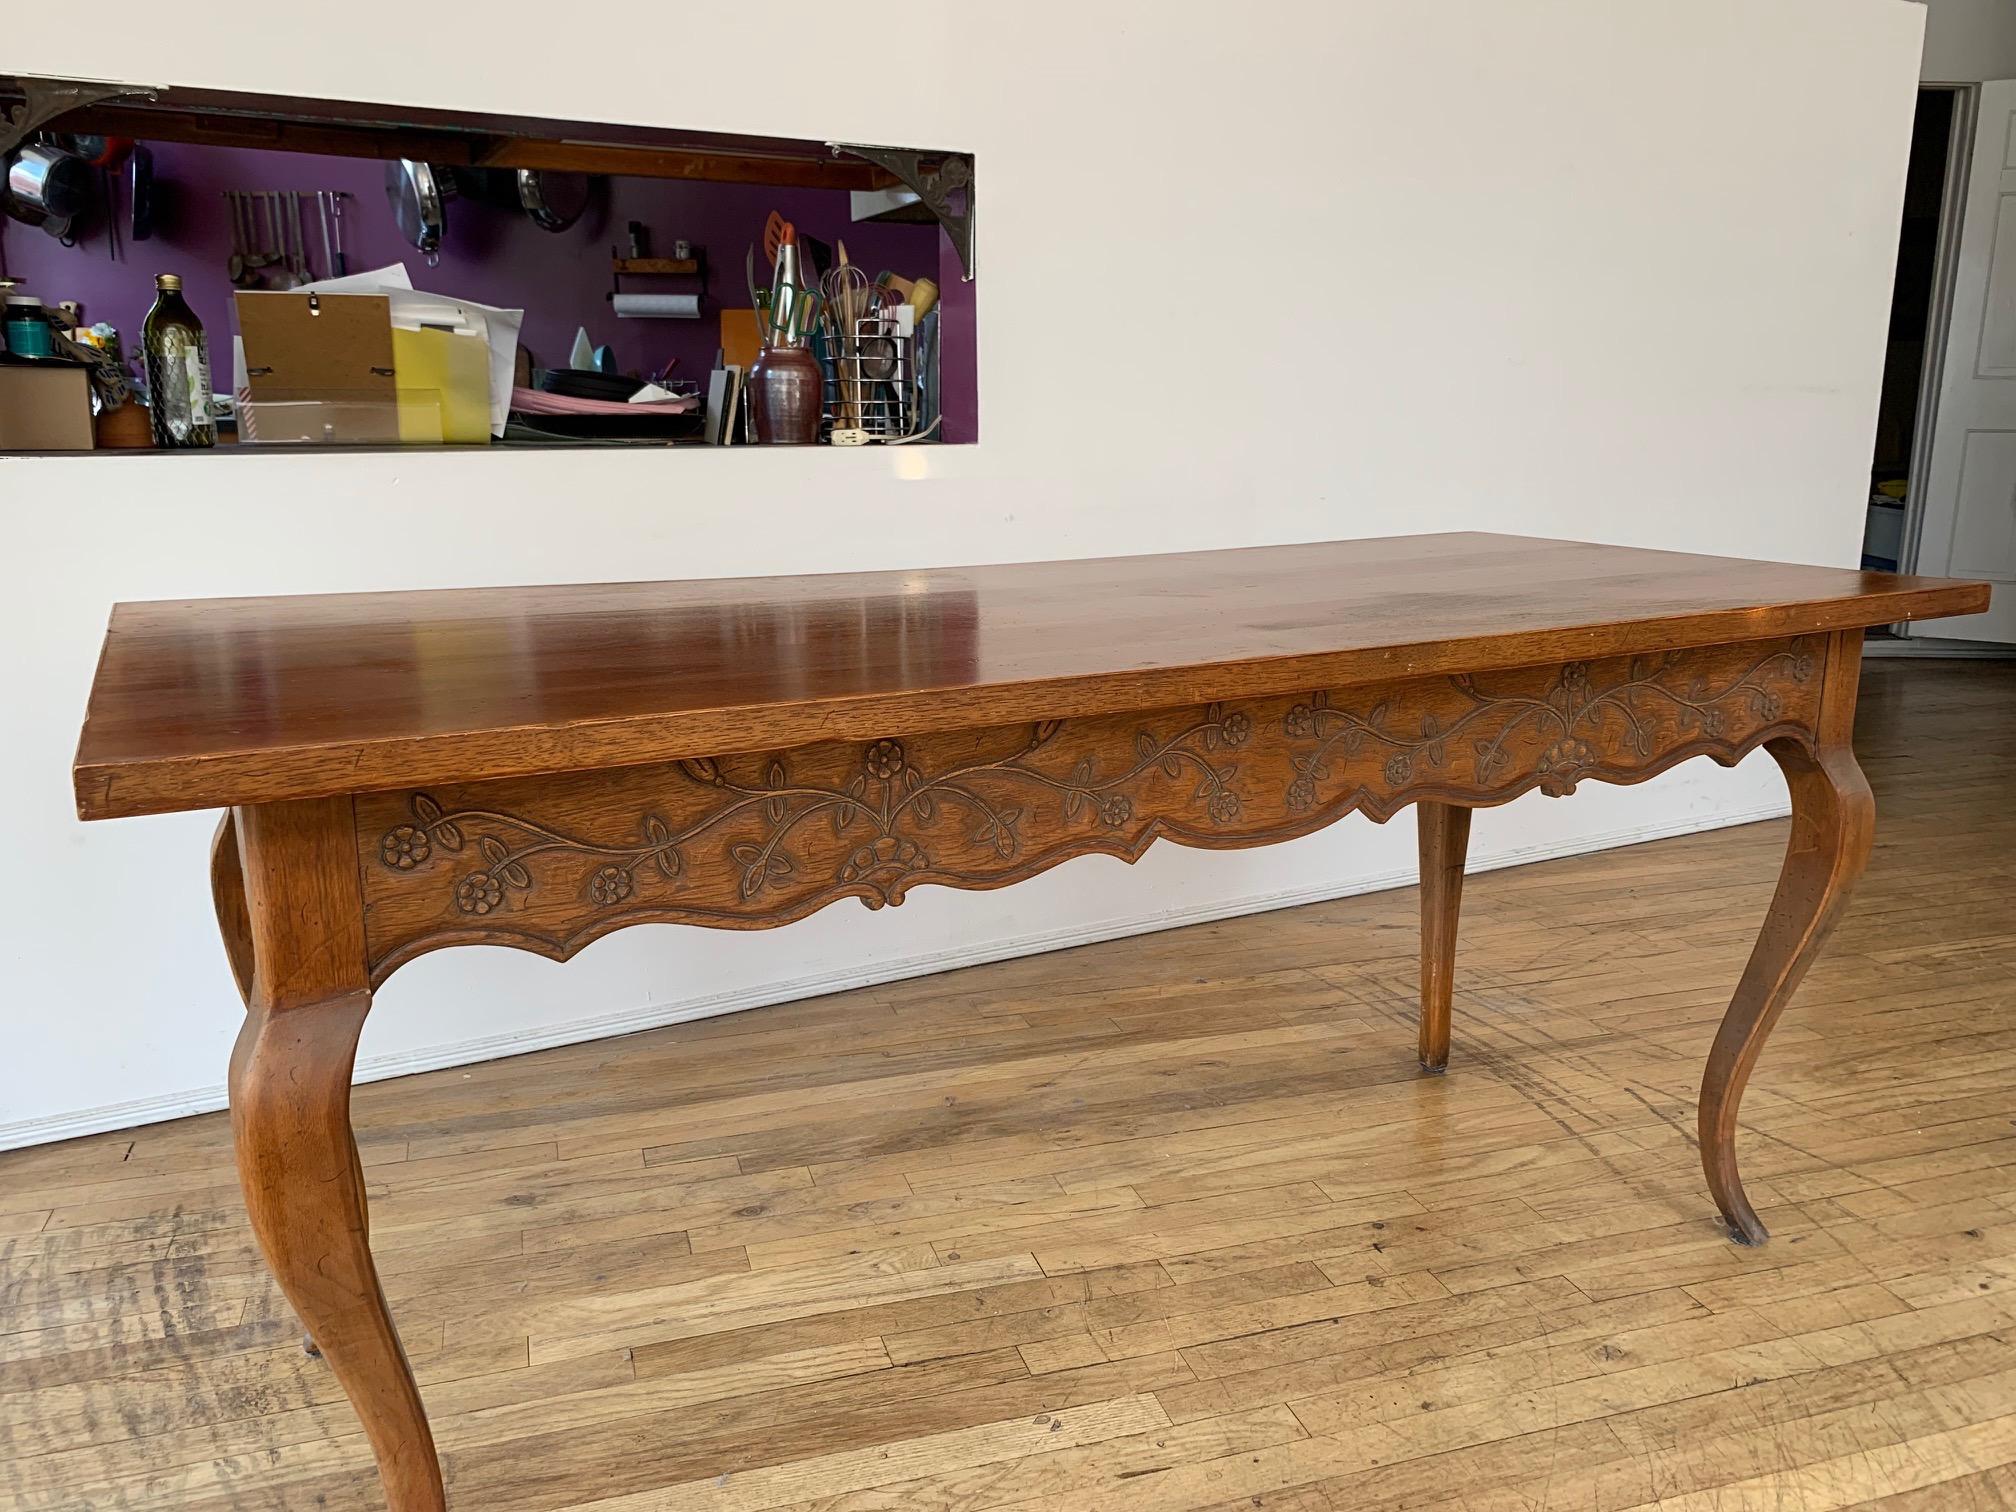 French Louis XV Provincial style carved walnut dining/refectory table.
Hand-carved foliage along the length on each side of the table. One side with two drawers. Sitting on cabriole legs. This is a beautiful provincial style piece with light wear to